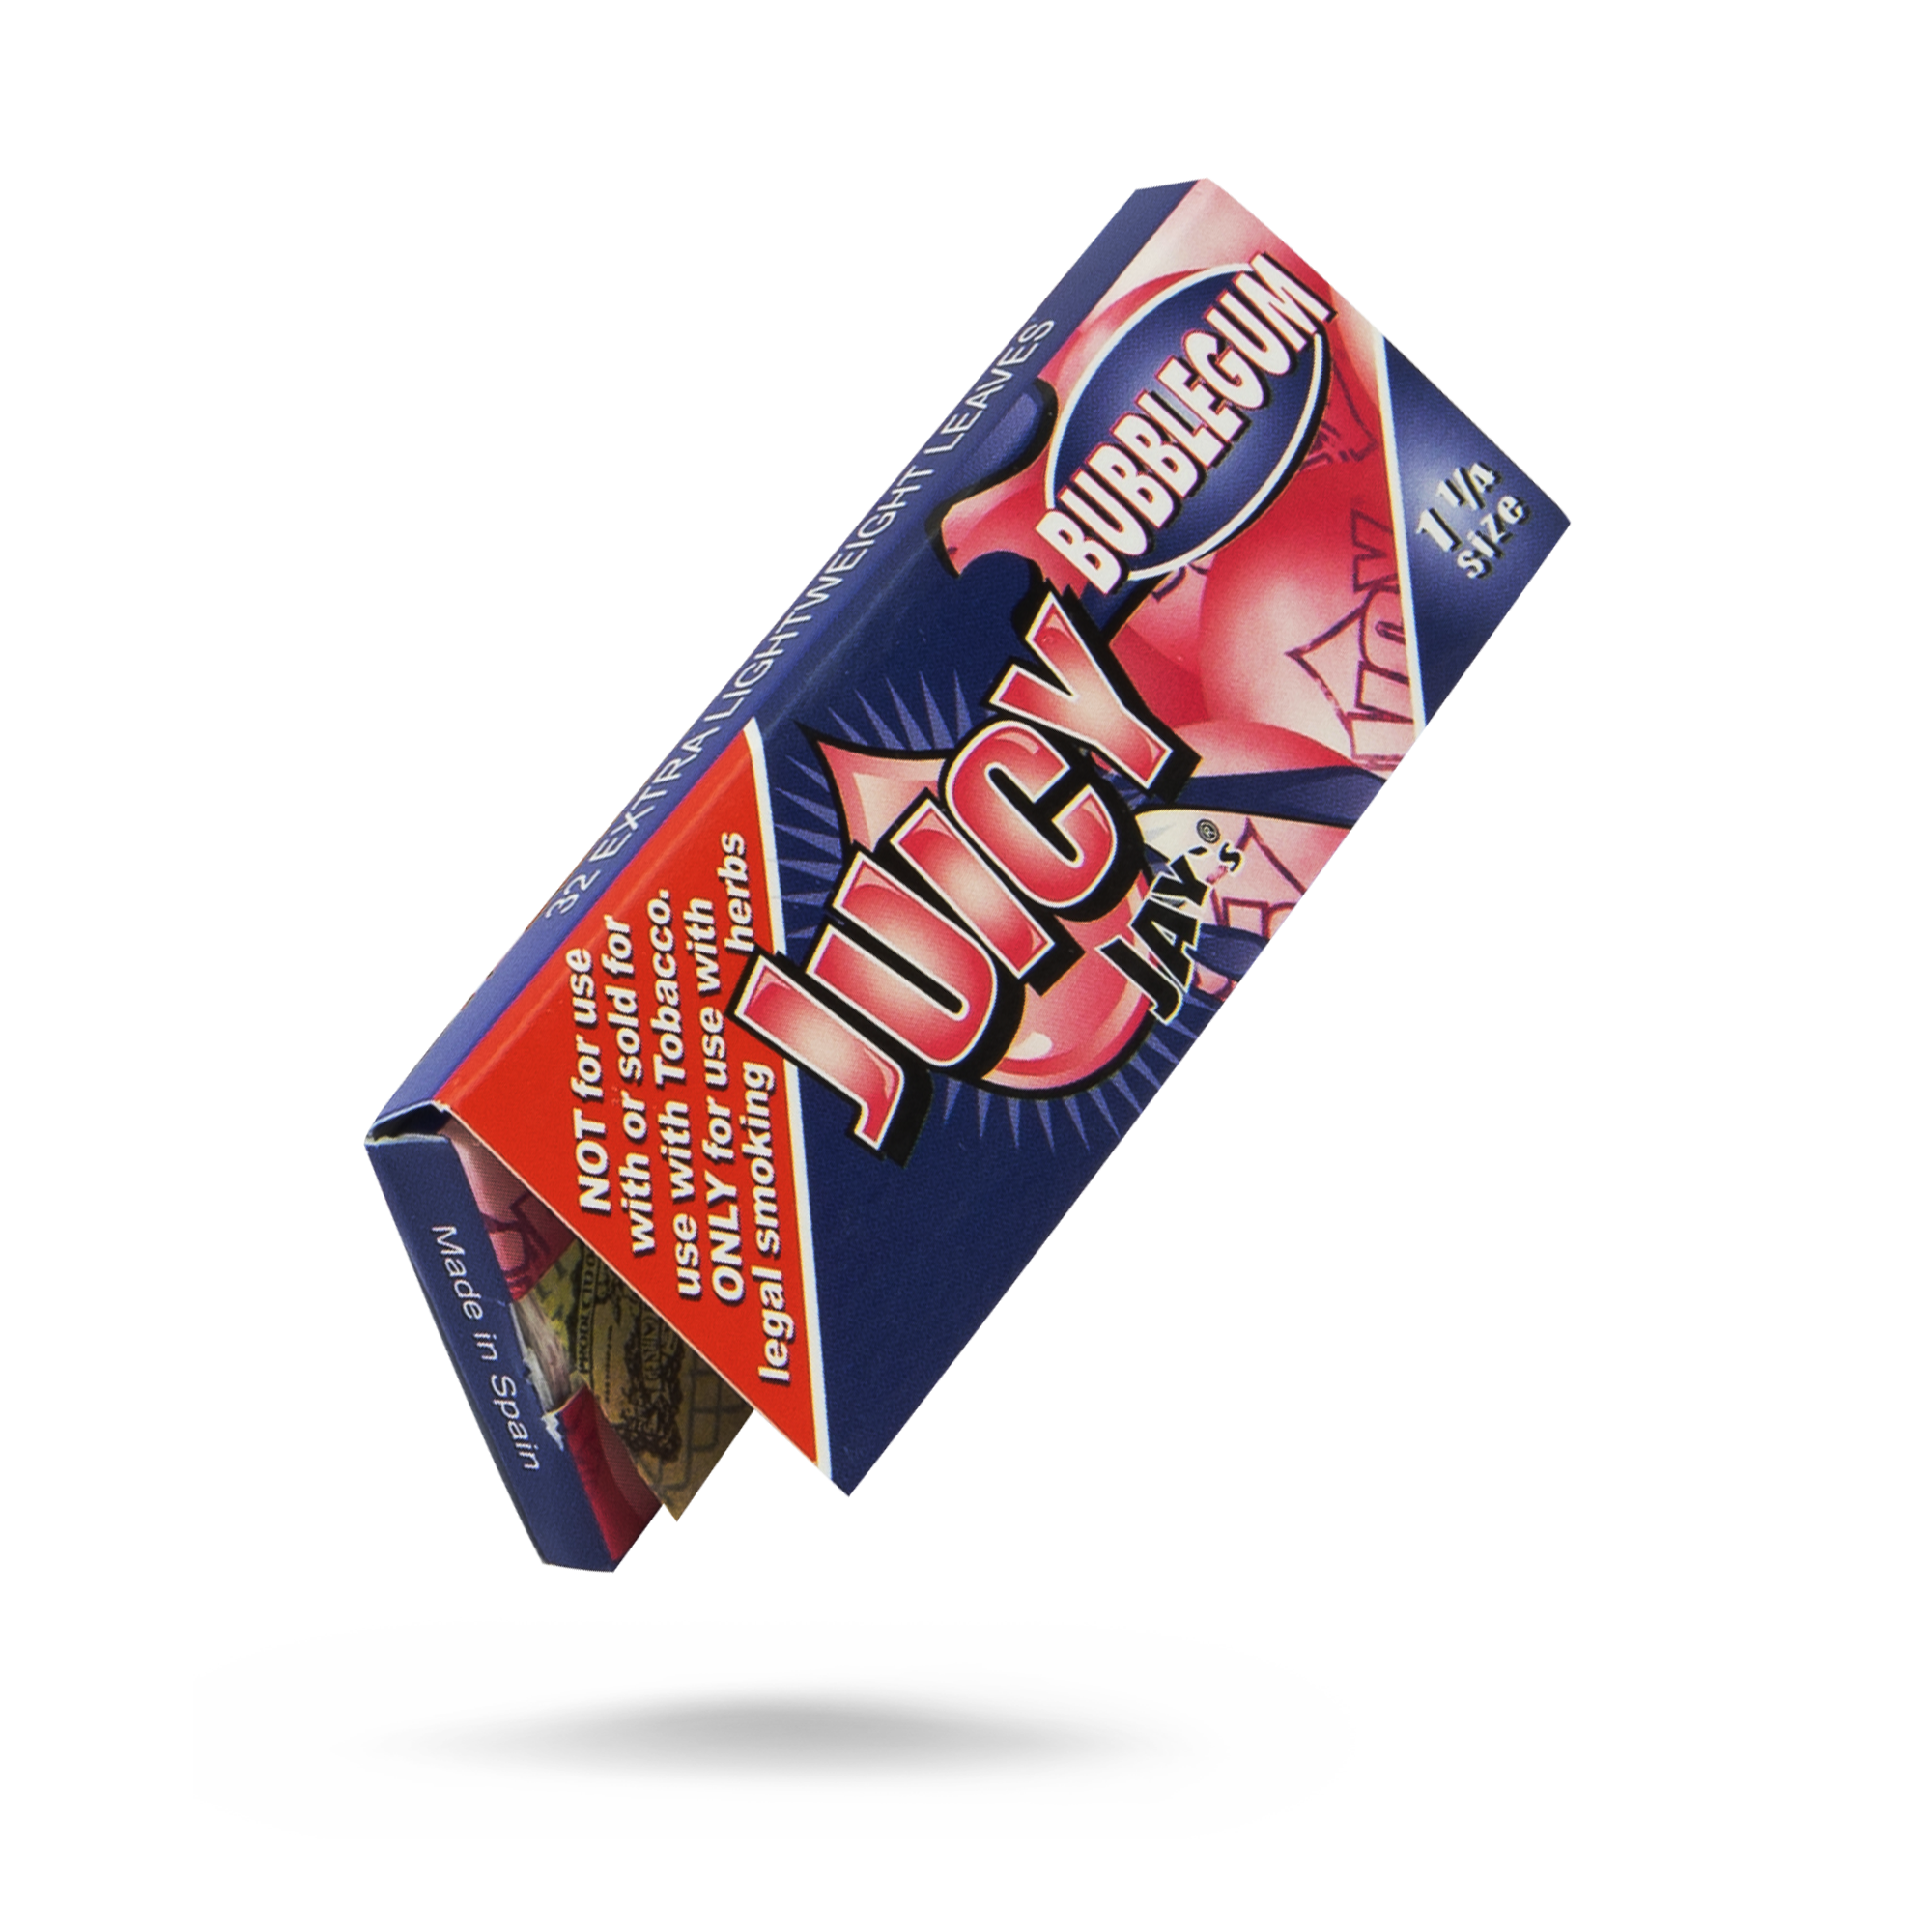 Juicy Jays 1 1/4 Bubble Gum Flavored Hemp Rolling Papers Rolling Papers esd-official